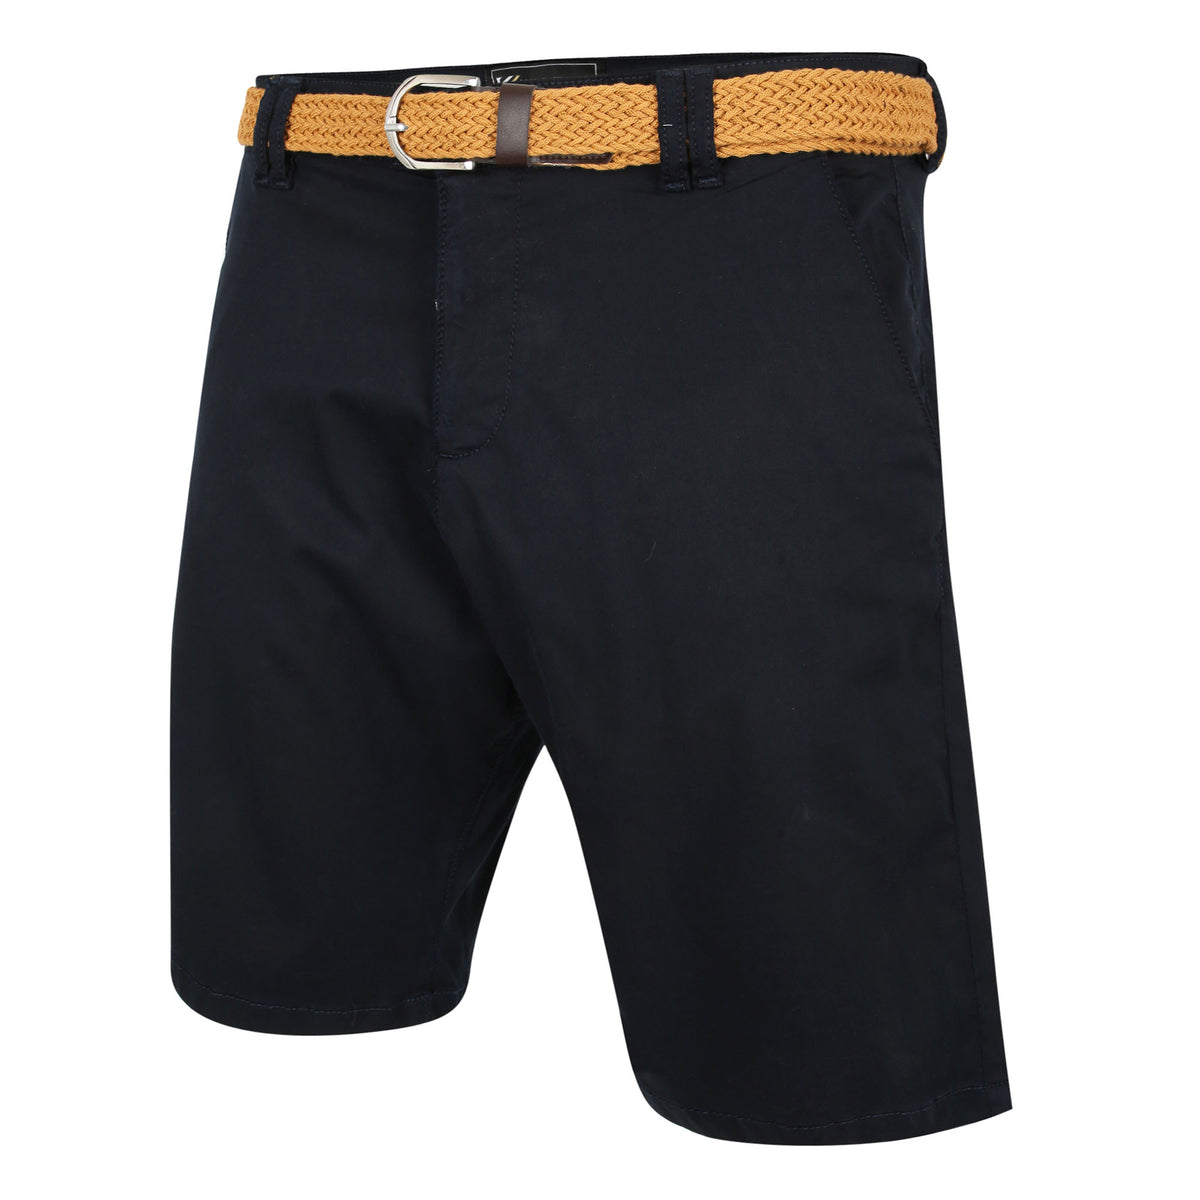 Belted Oxford Stretch Chino Shorts